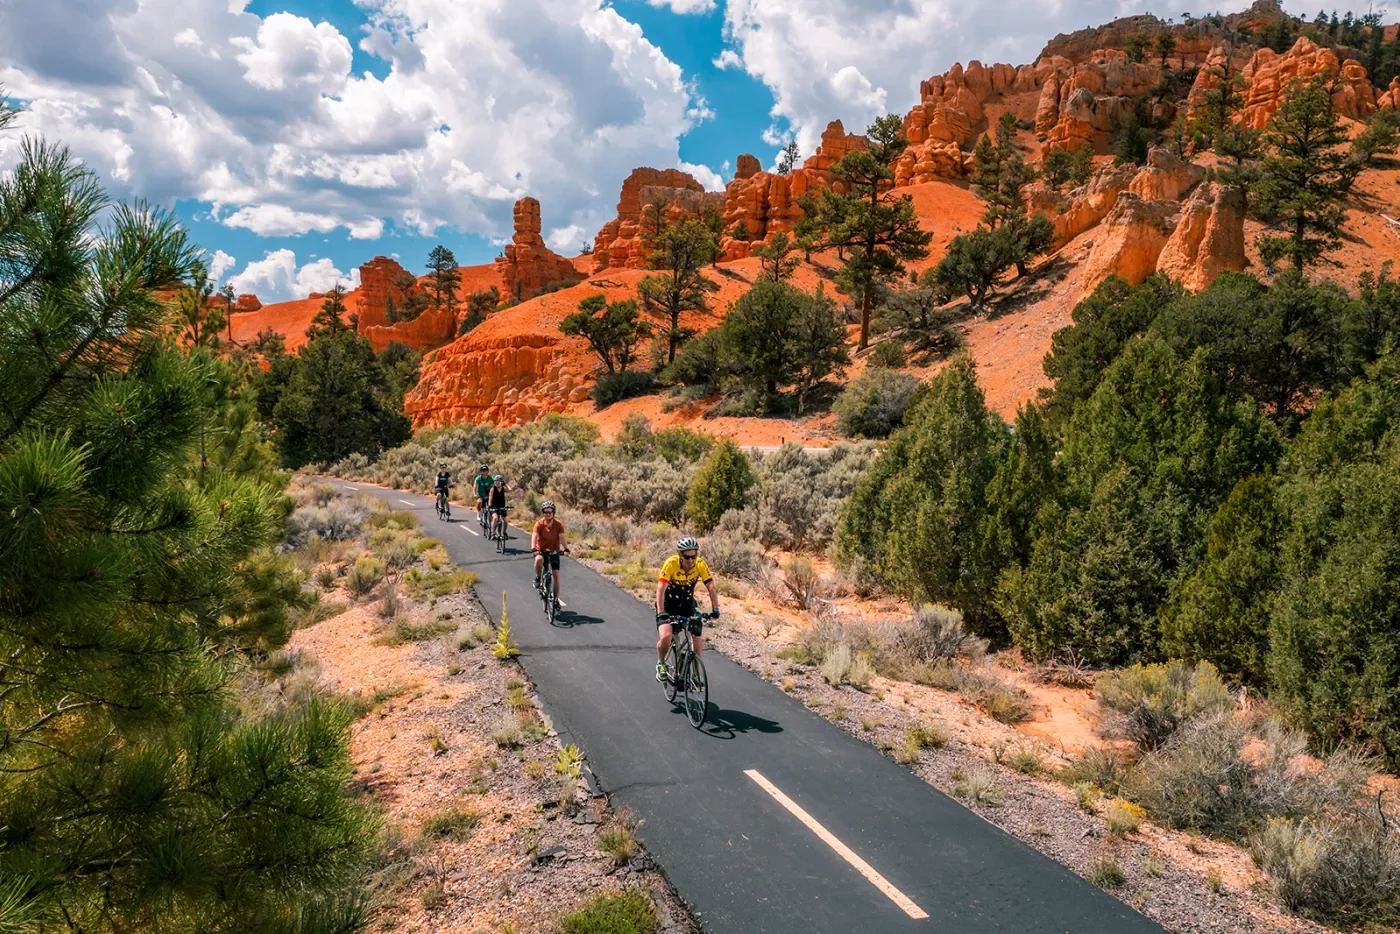 Five guests cycling down road, vibrant orange rocks behind them, trees beside them.